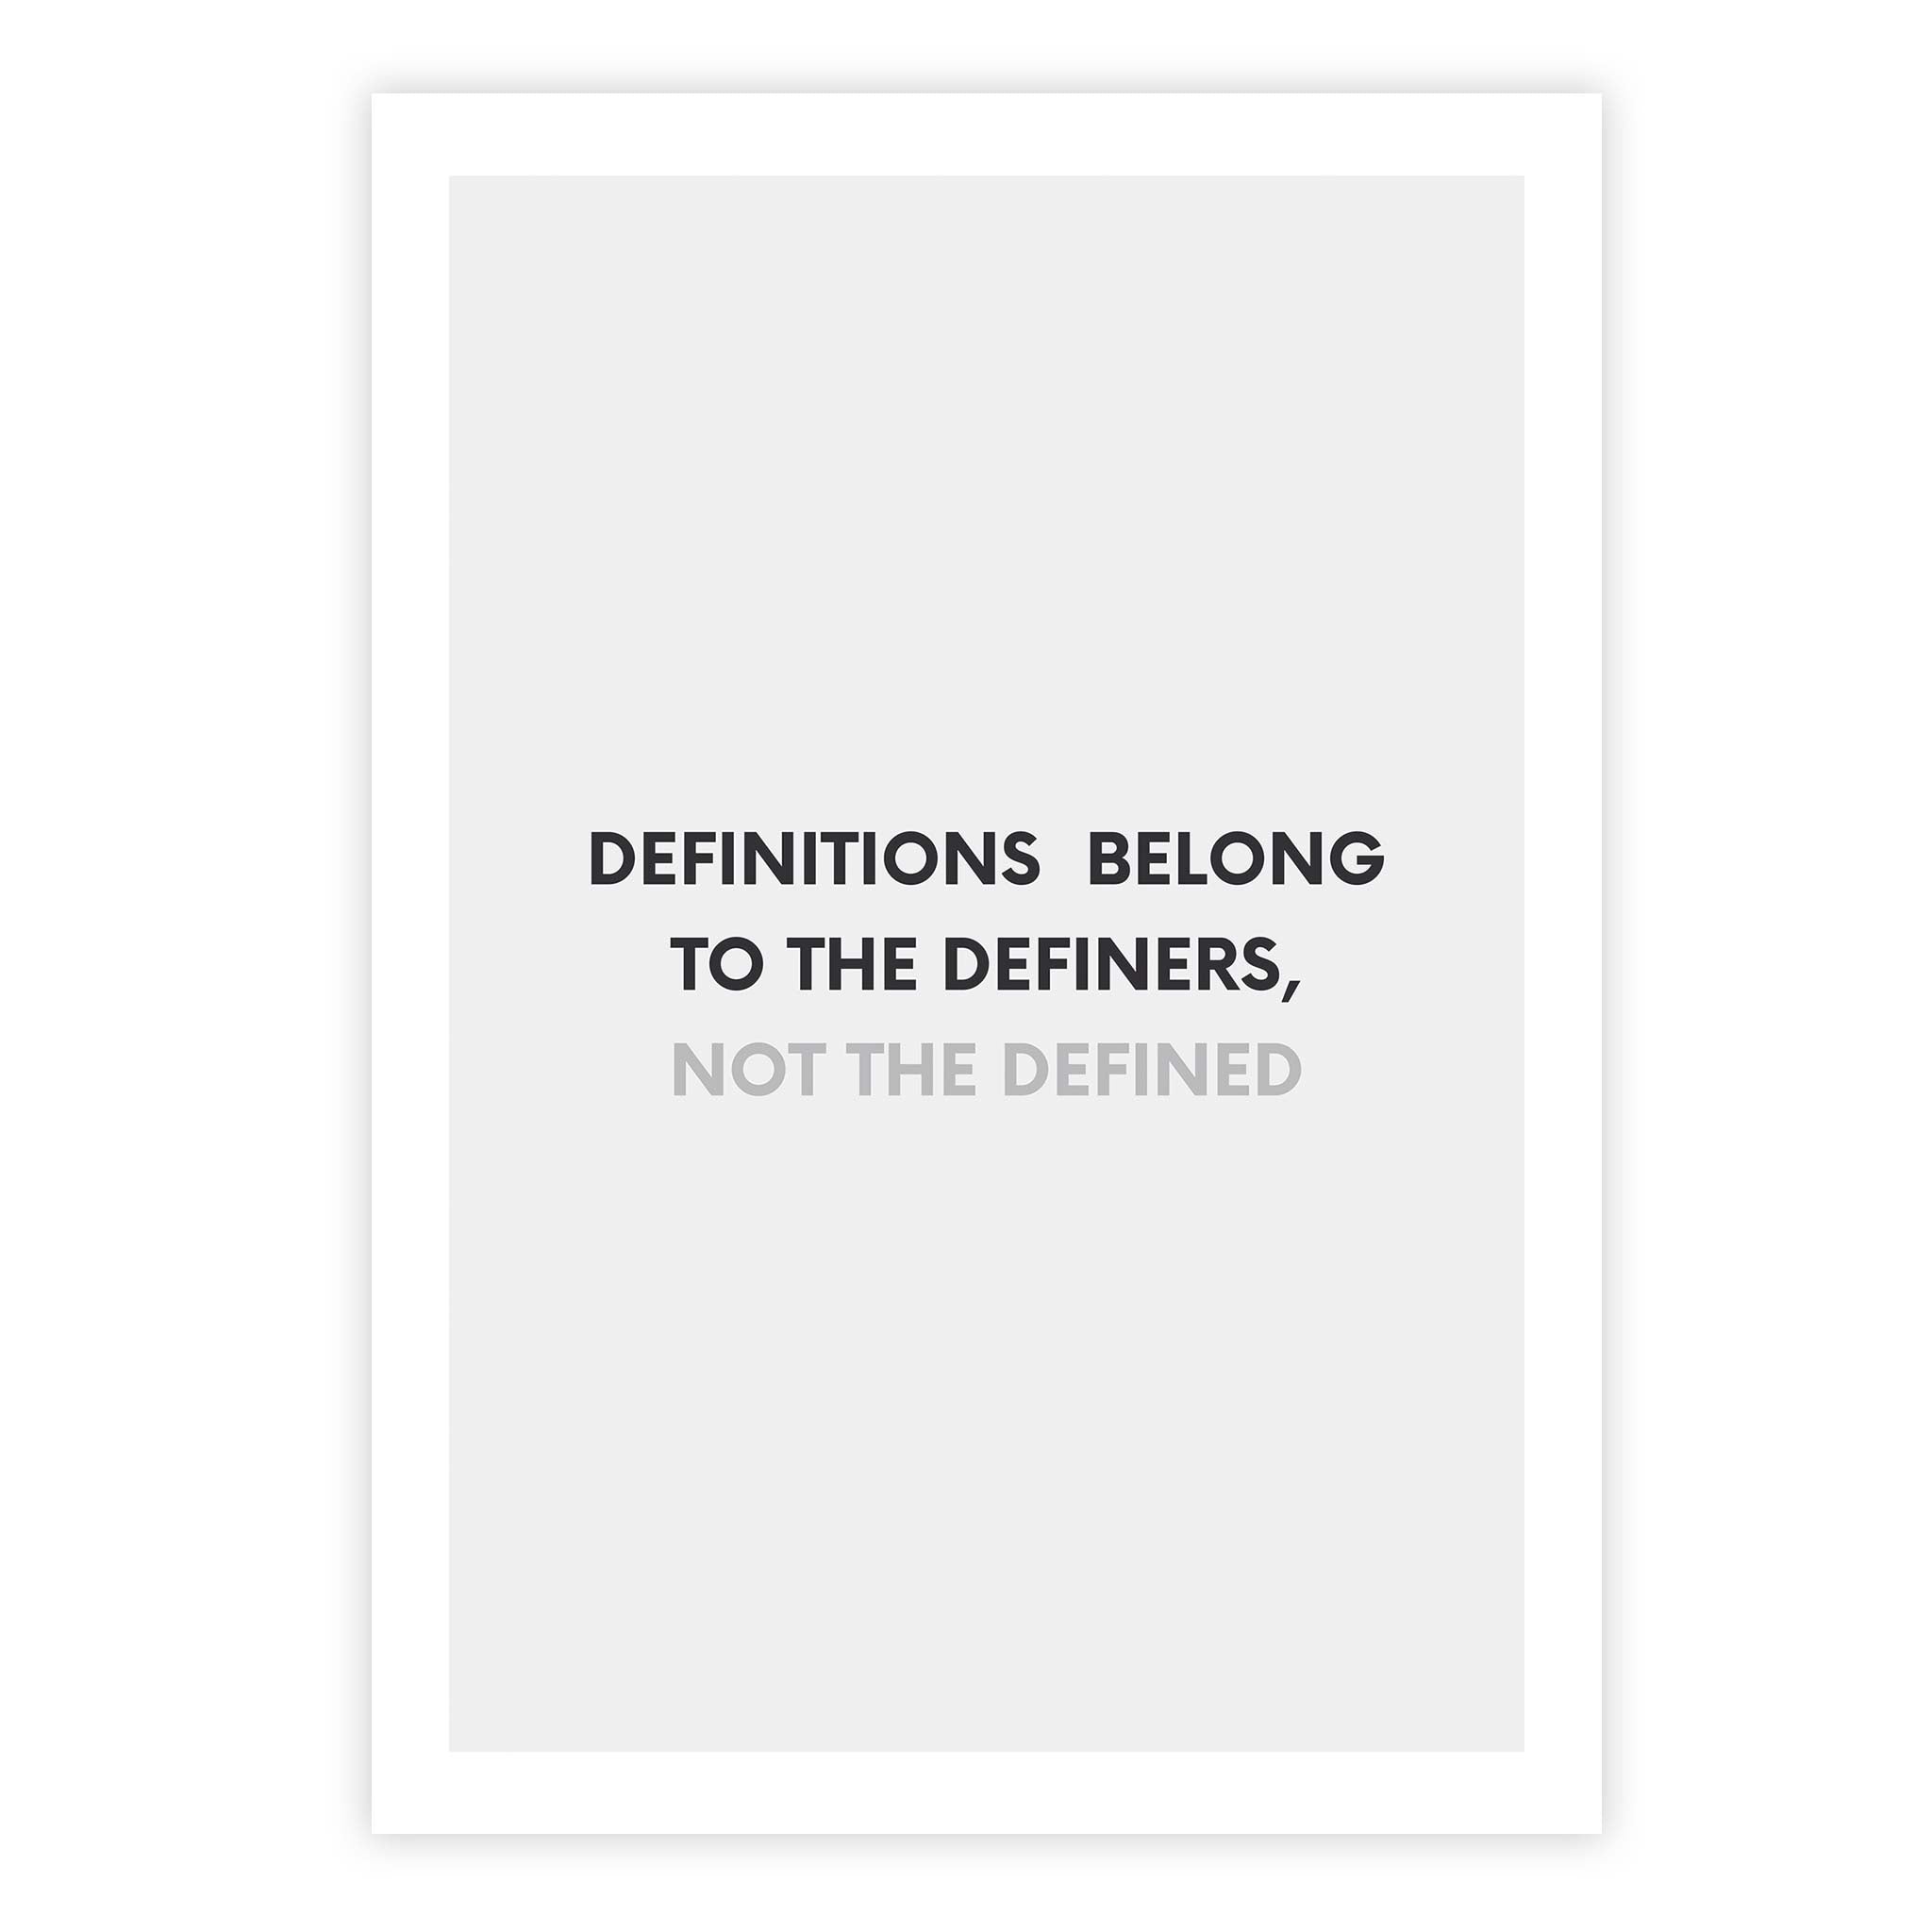 Definitions belong to the definers, not the defined